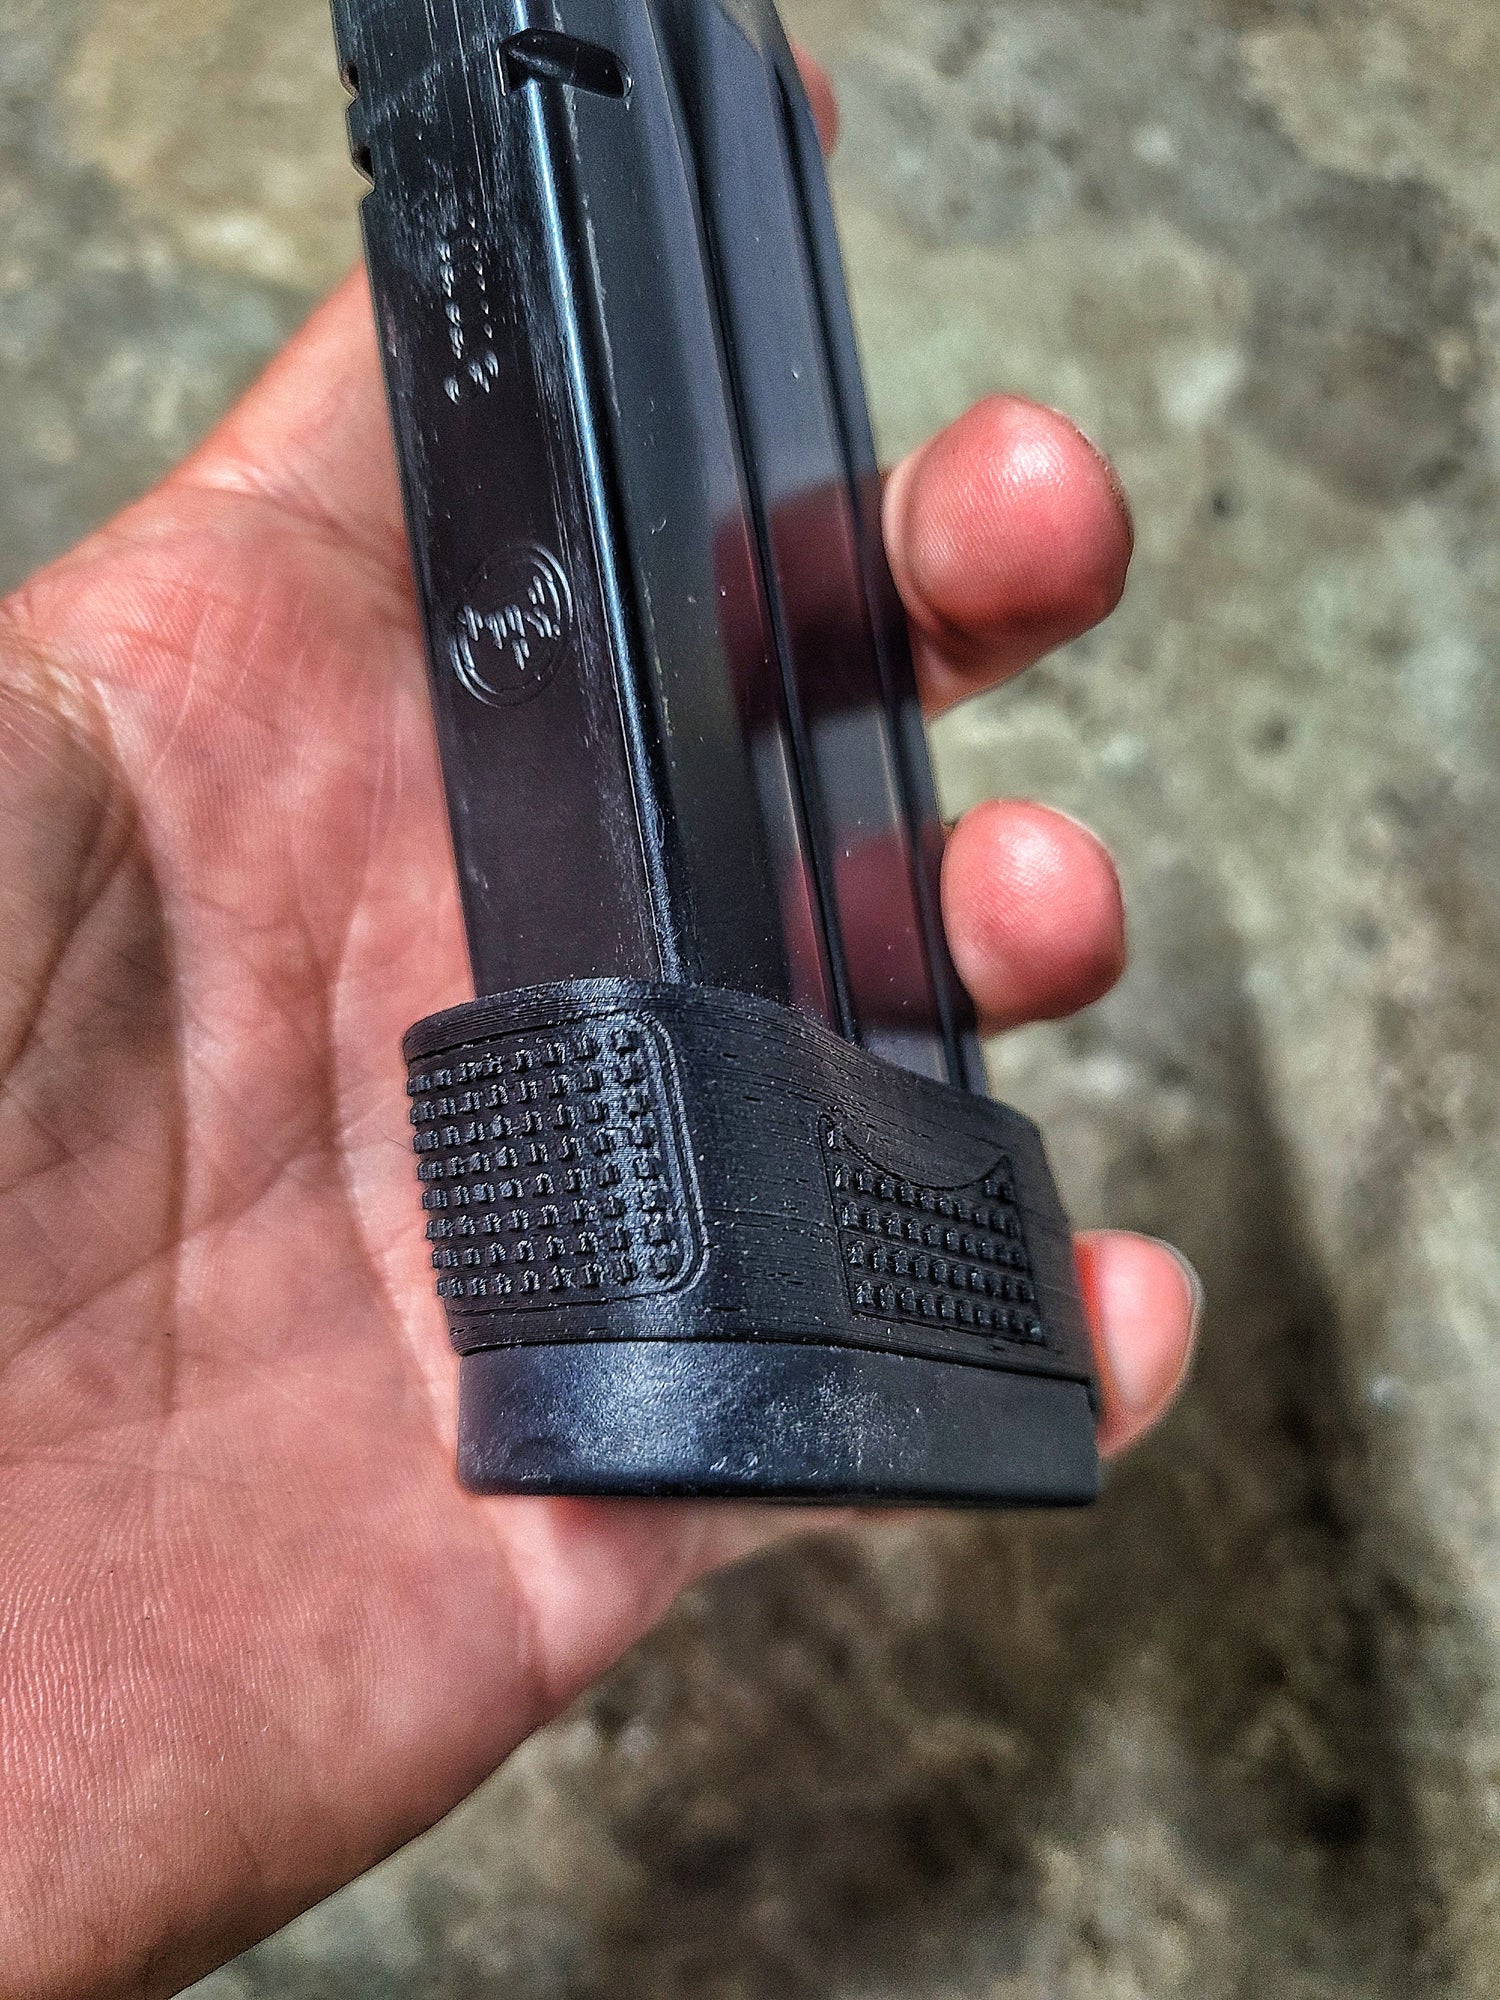 CZ P10c Magazine Adapter sleeve used to run P10F magazines in the P10c Frame